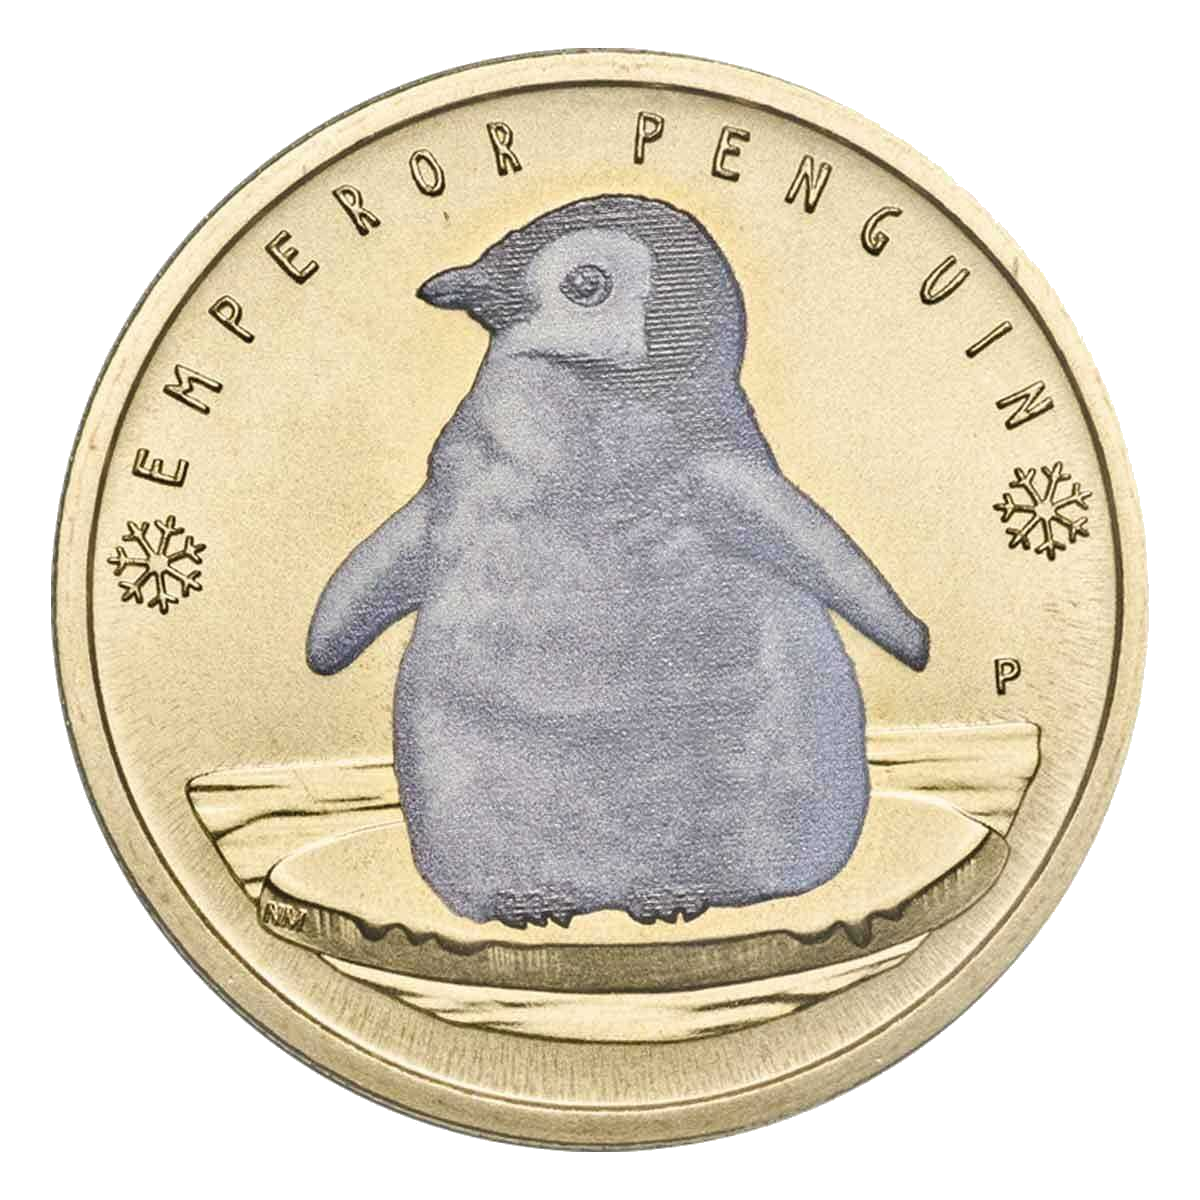 2017 $1 AAT Emperor Penguins Stamp & Coin Cover